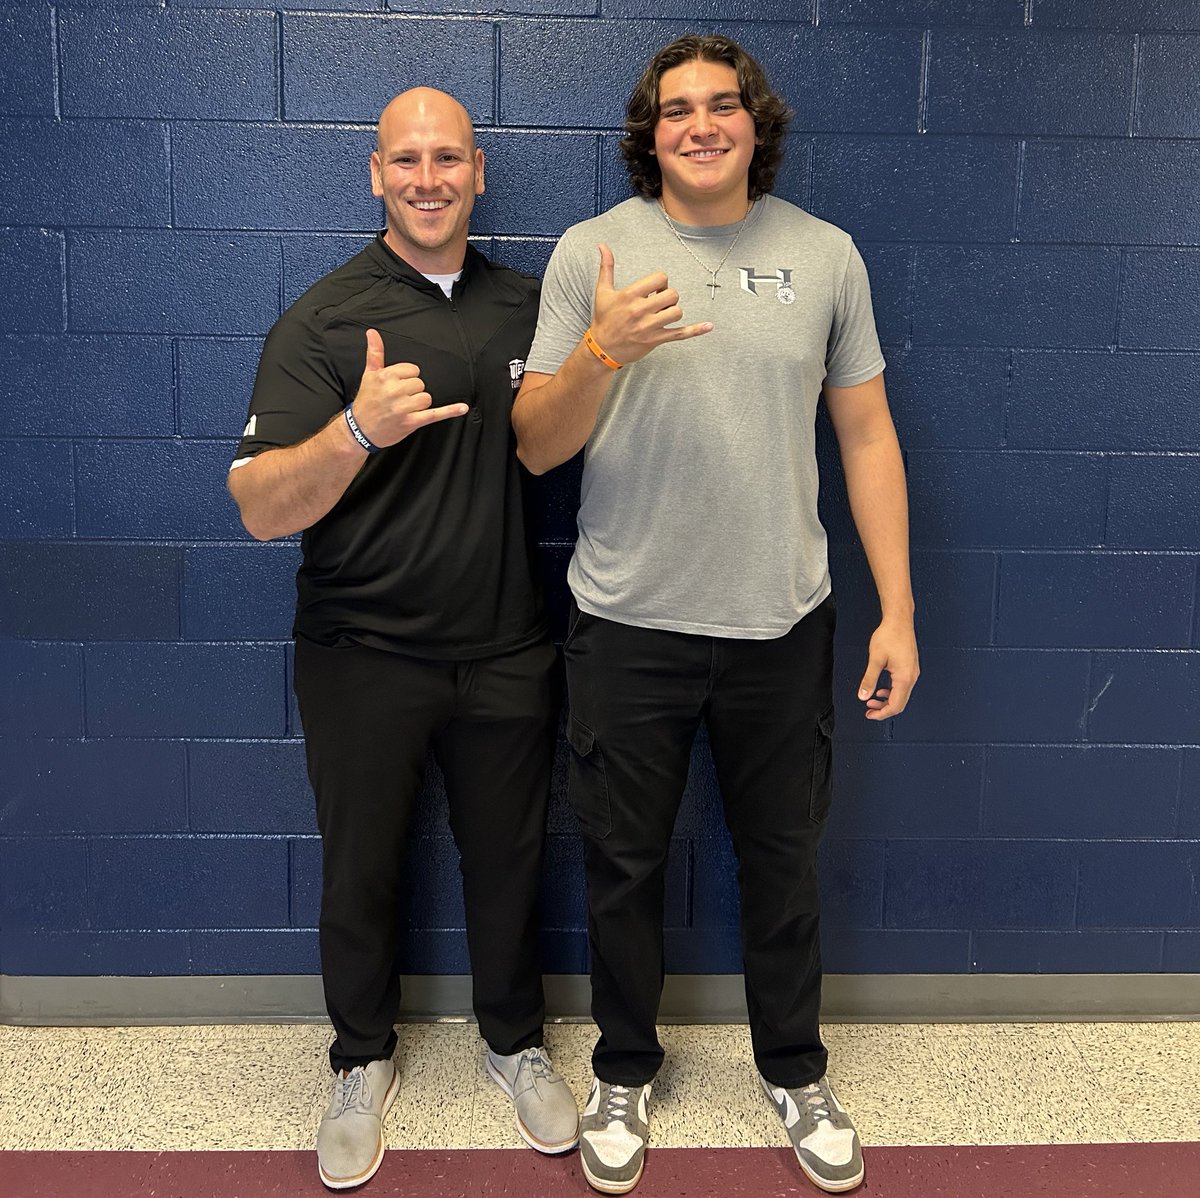 Great stop by Hendrickson to see @CoachDPearce! Also great to see our DOG in the trenches @LukaMatamoros70! #WinTheWest 🟠🔵 #2TRIKE5OLD ⛏️⛏️